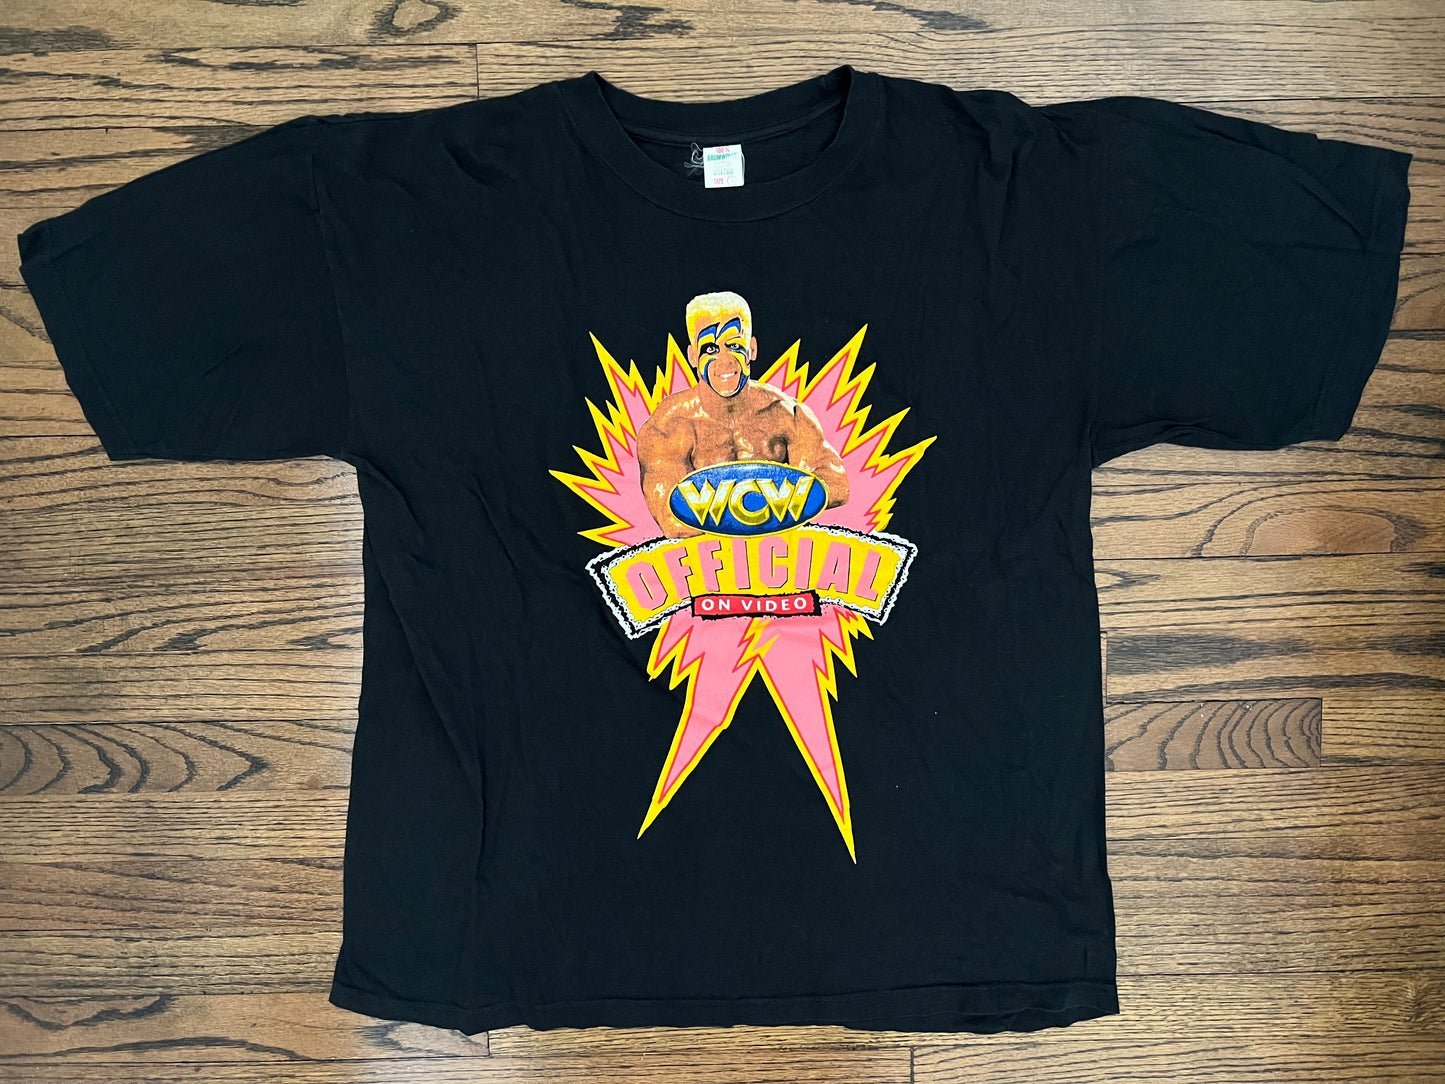 1993 WCW Sting “Official Video” shirt